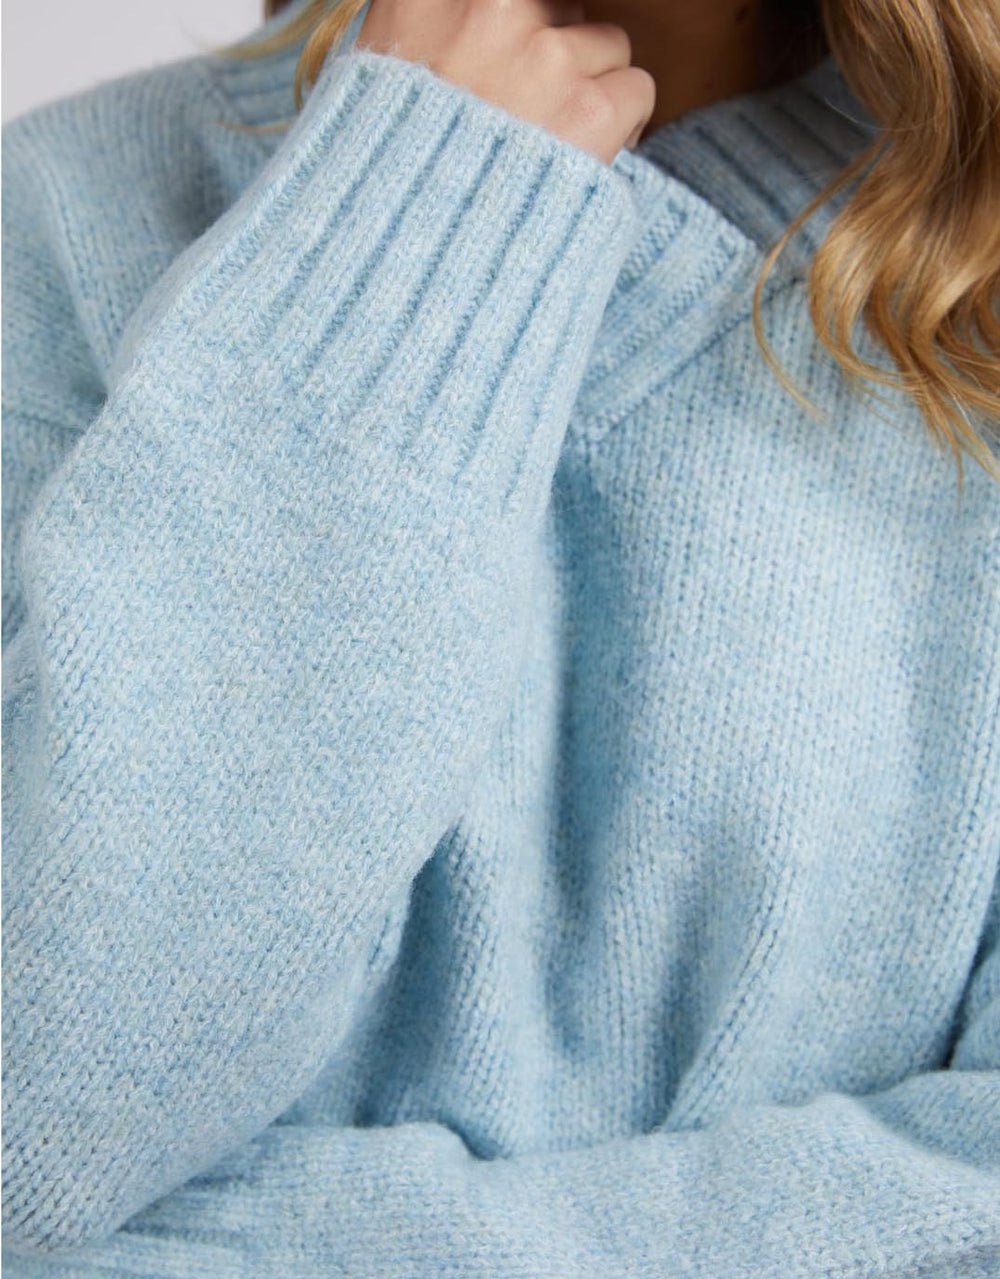 foxwood-pepper-knit-pale-blue-womens-clothing